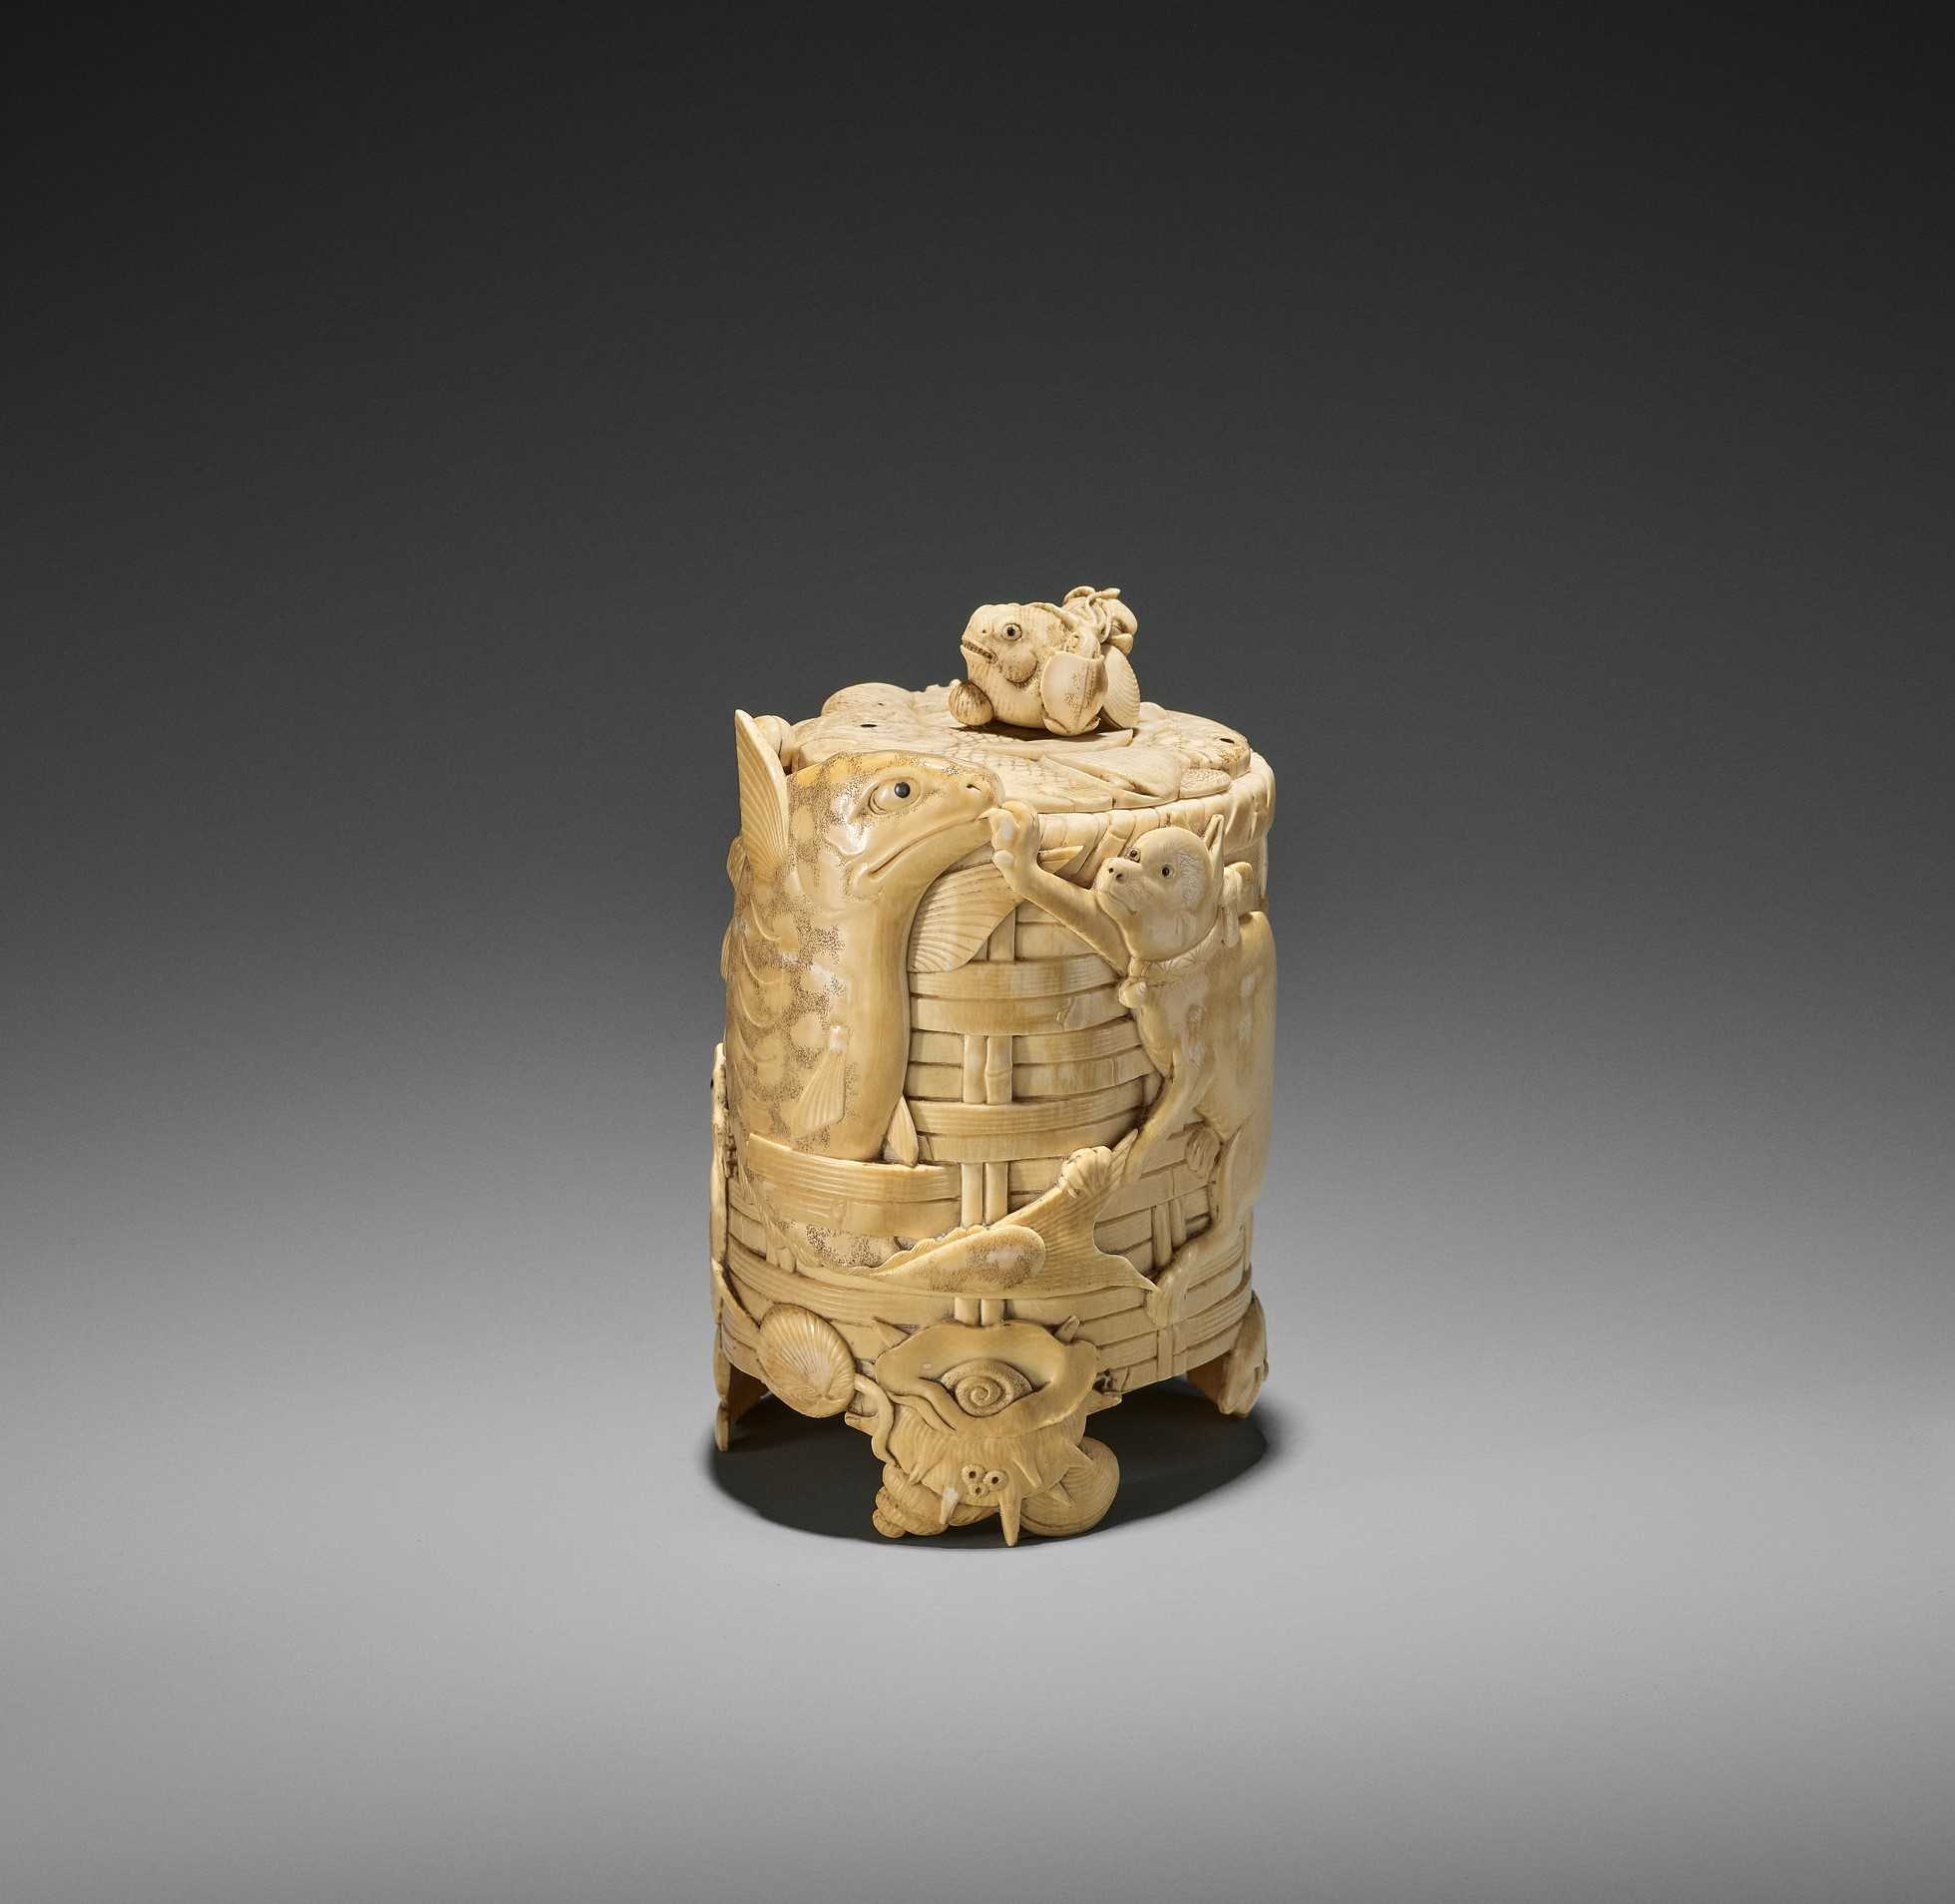 Lot 134 - SHOMIN: A FINE IVORY TUSK ‘BASKETWEAVE’ BOX AND COVER WITH AQUATIC ANIMALS AND CAT